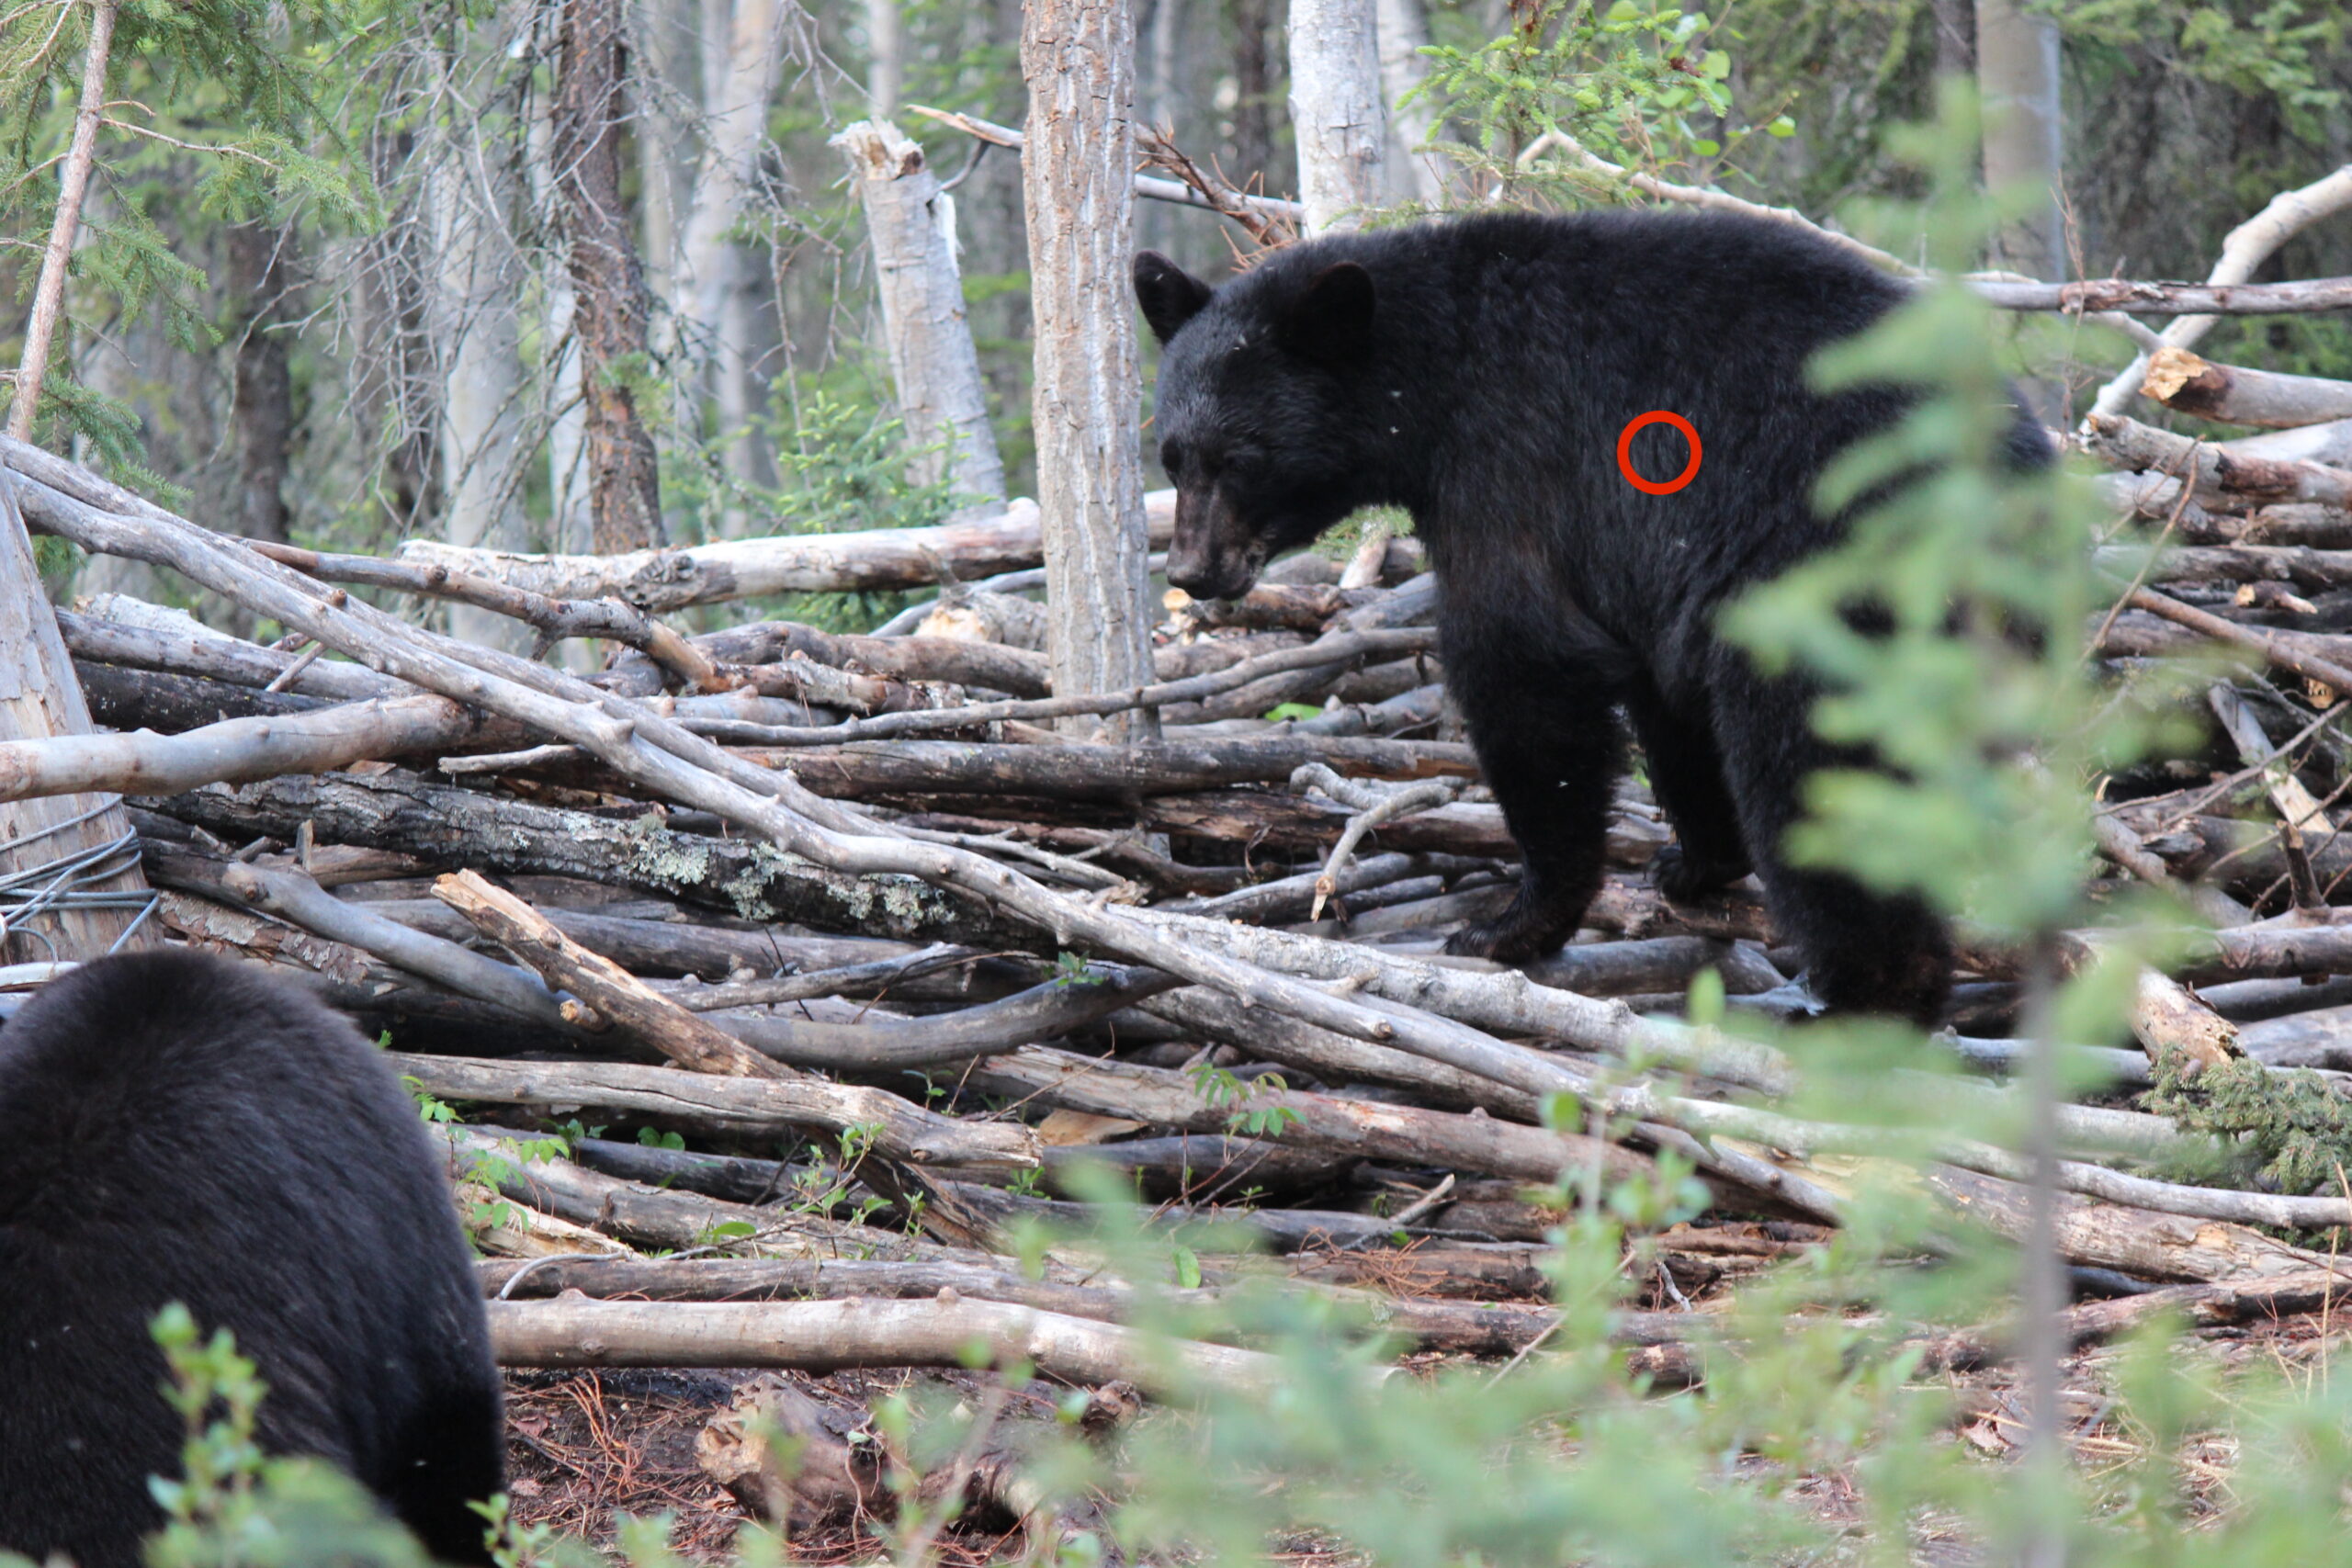 Ideal shot placement for where to shoot a bear is a slightly quartering-away bear like this one.